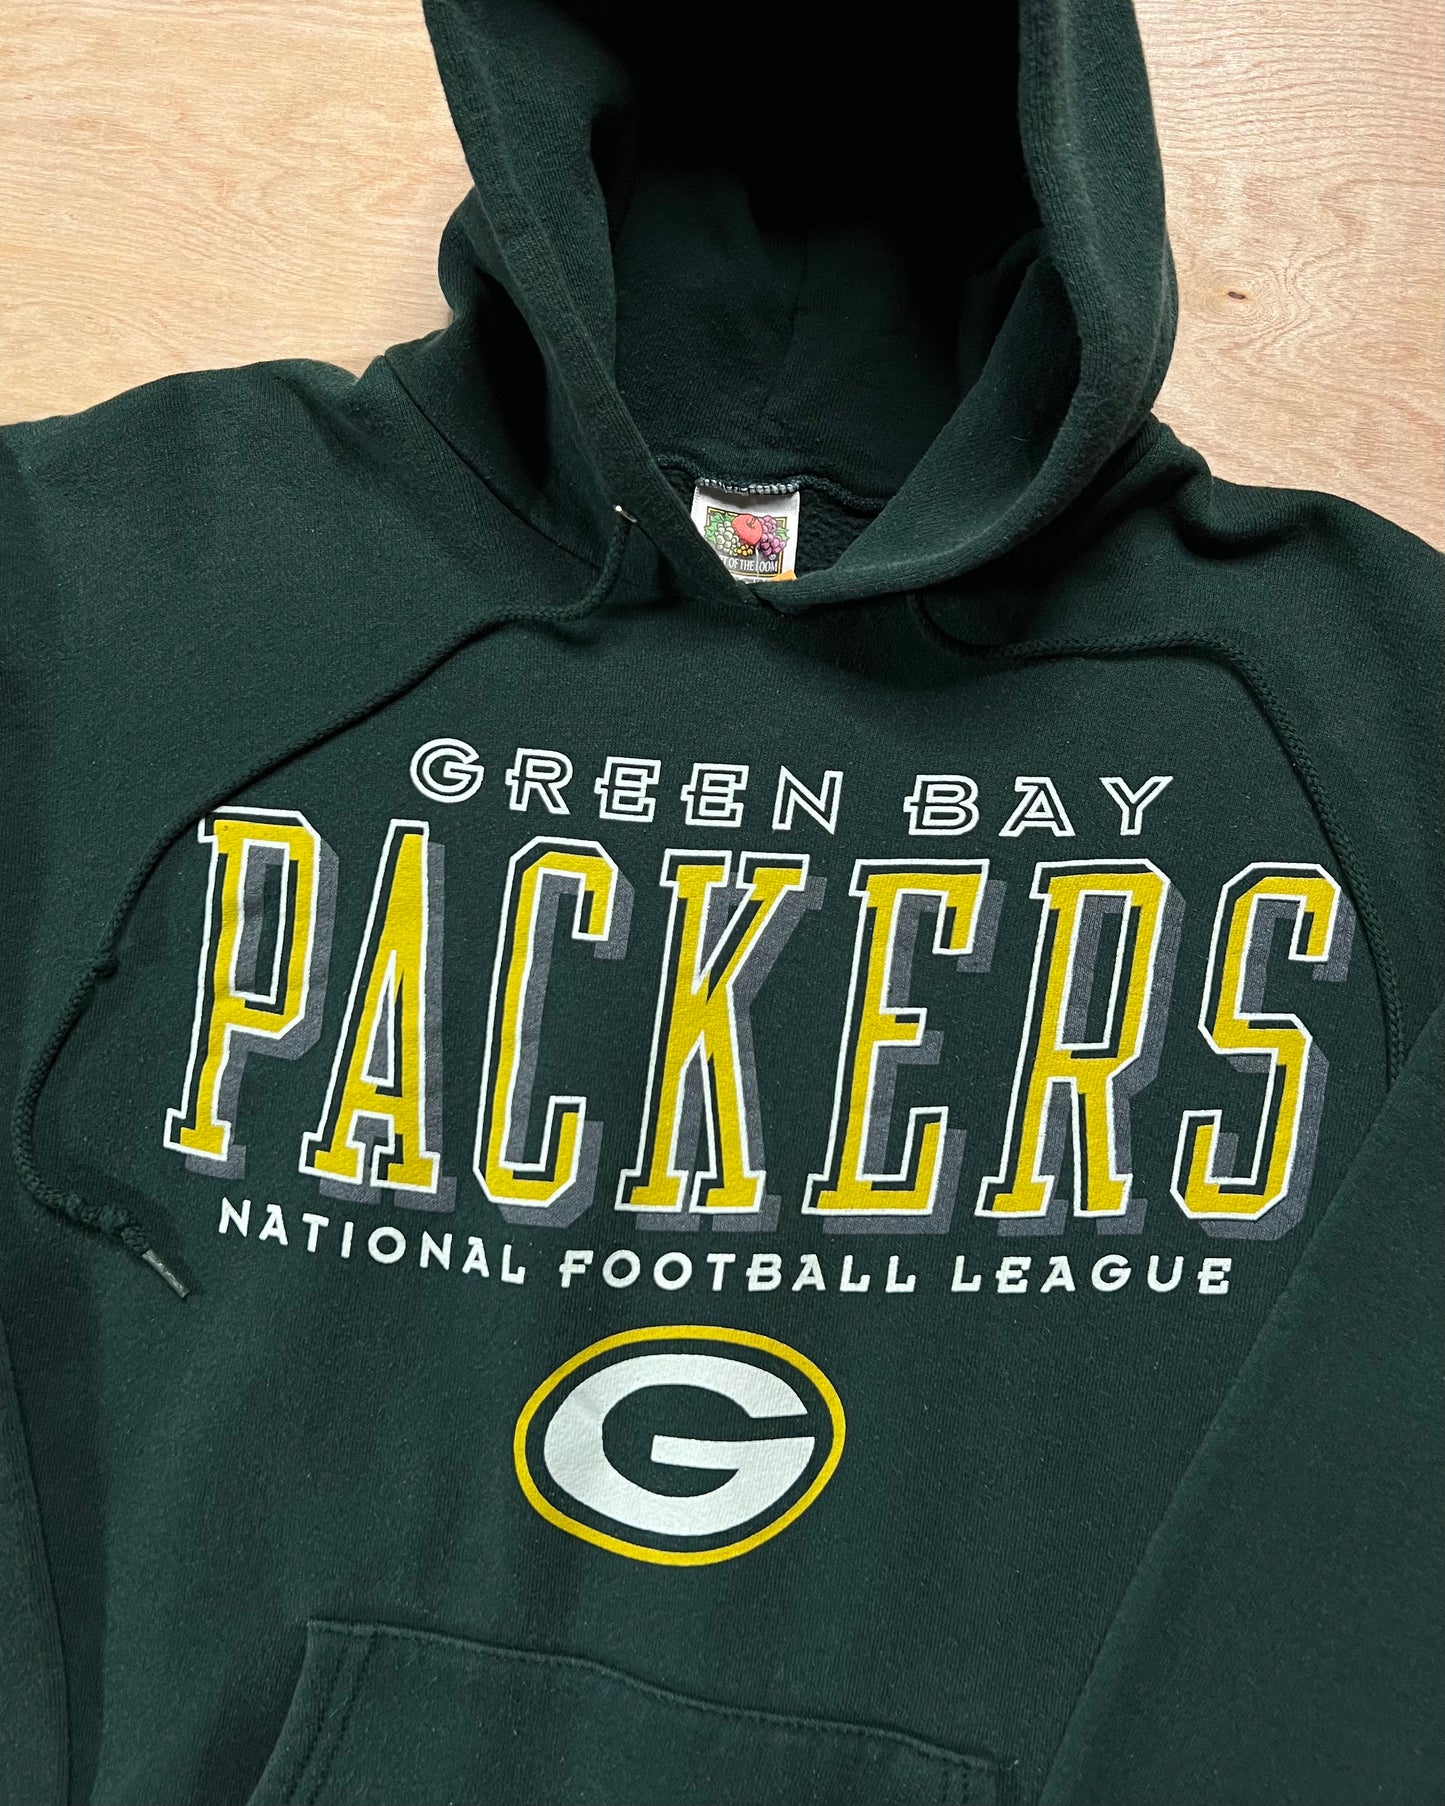 Vintage 1990's Green Bay Packers Fruit of the Loom Crewneck